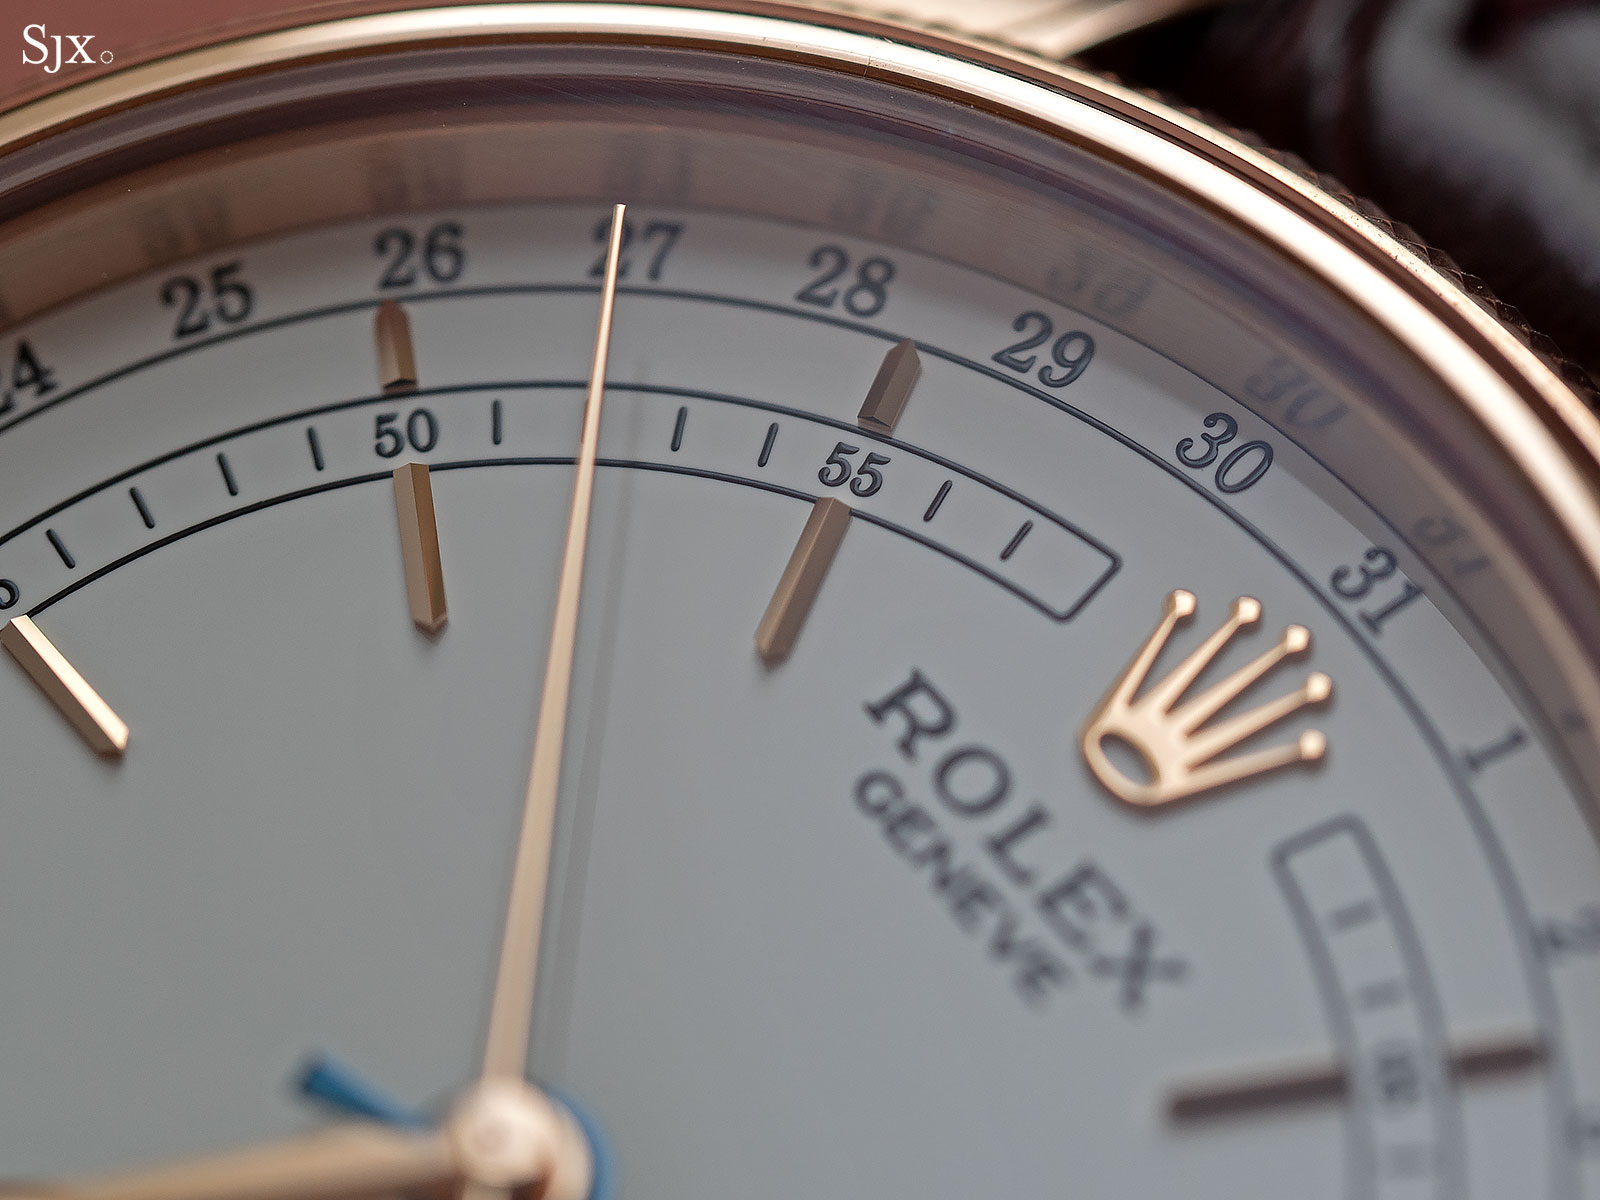 Rolex Cellini Moonphase 50535 review 4